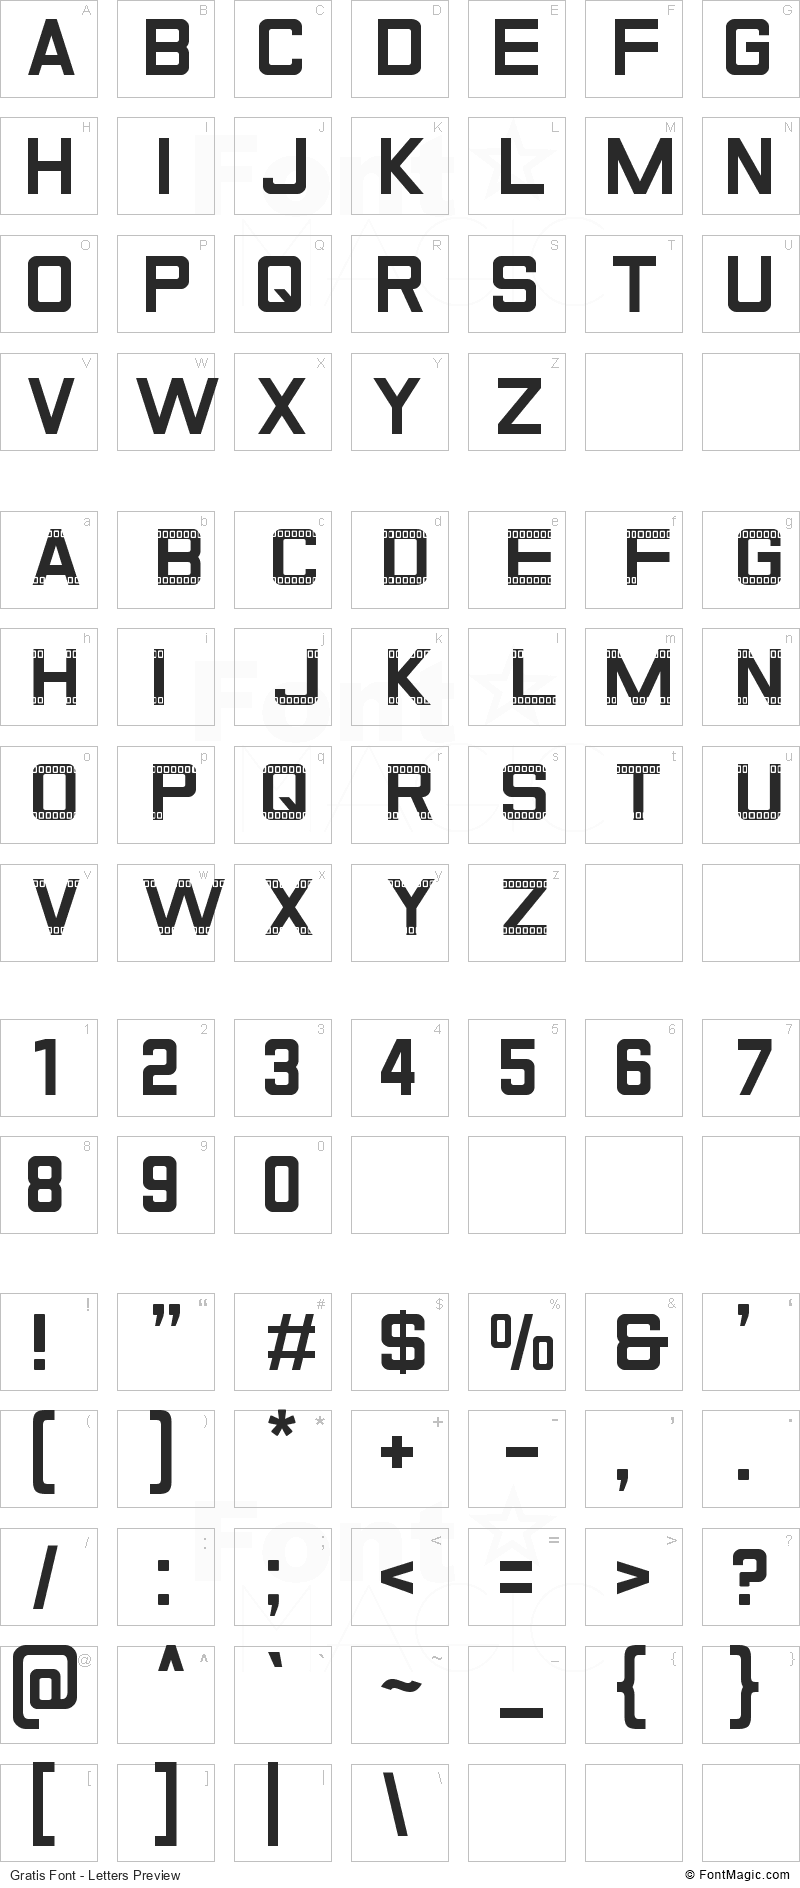 Gratis Font - All Latters Preview Chart